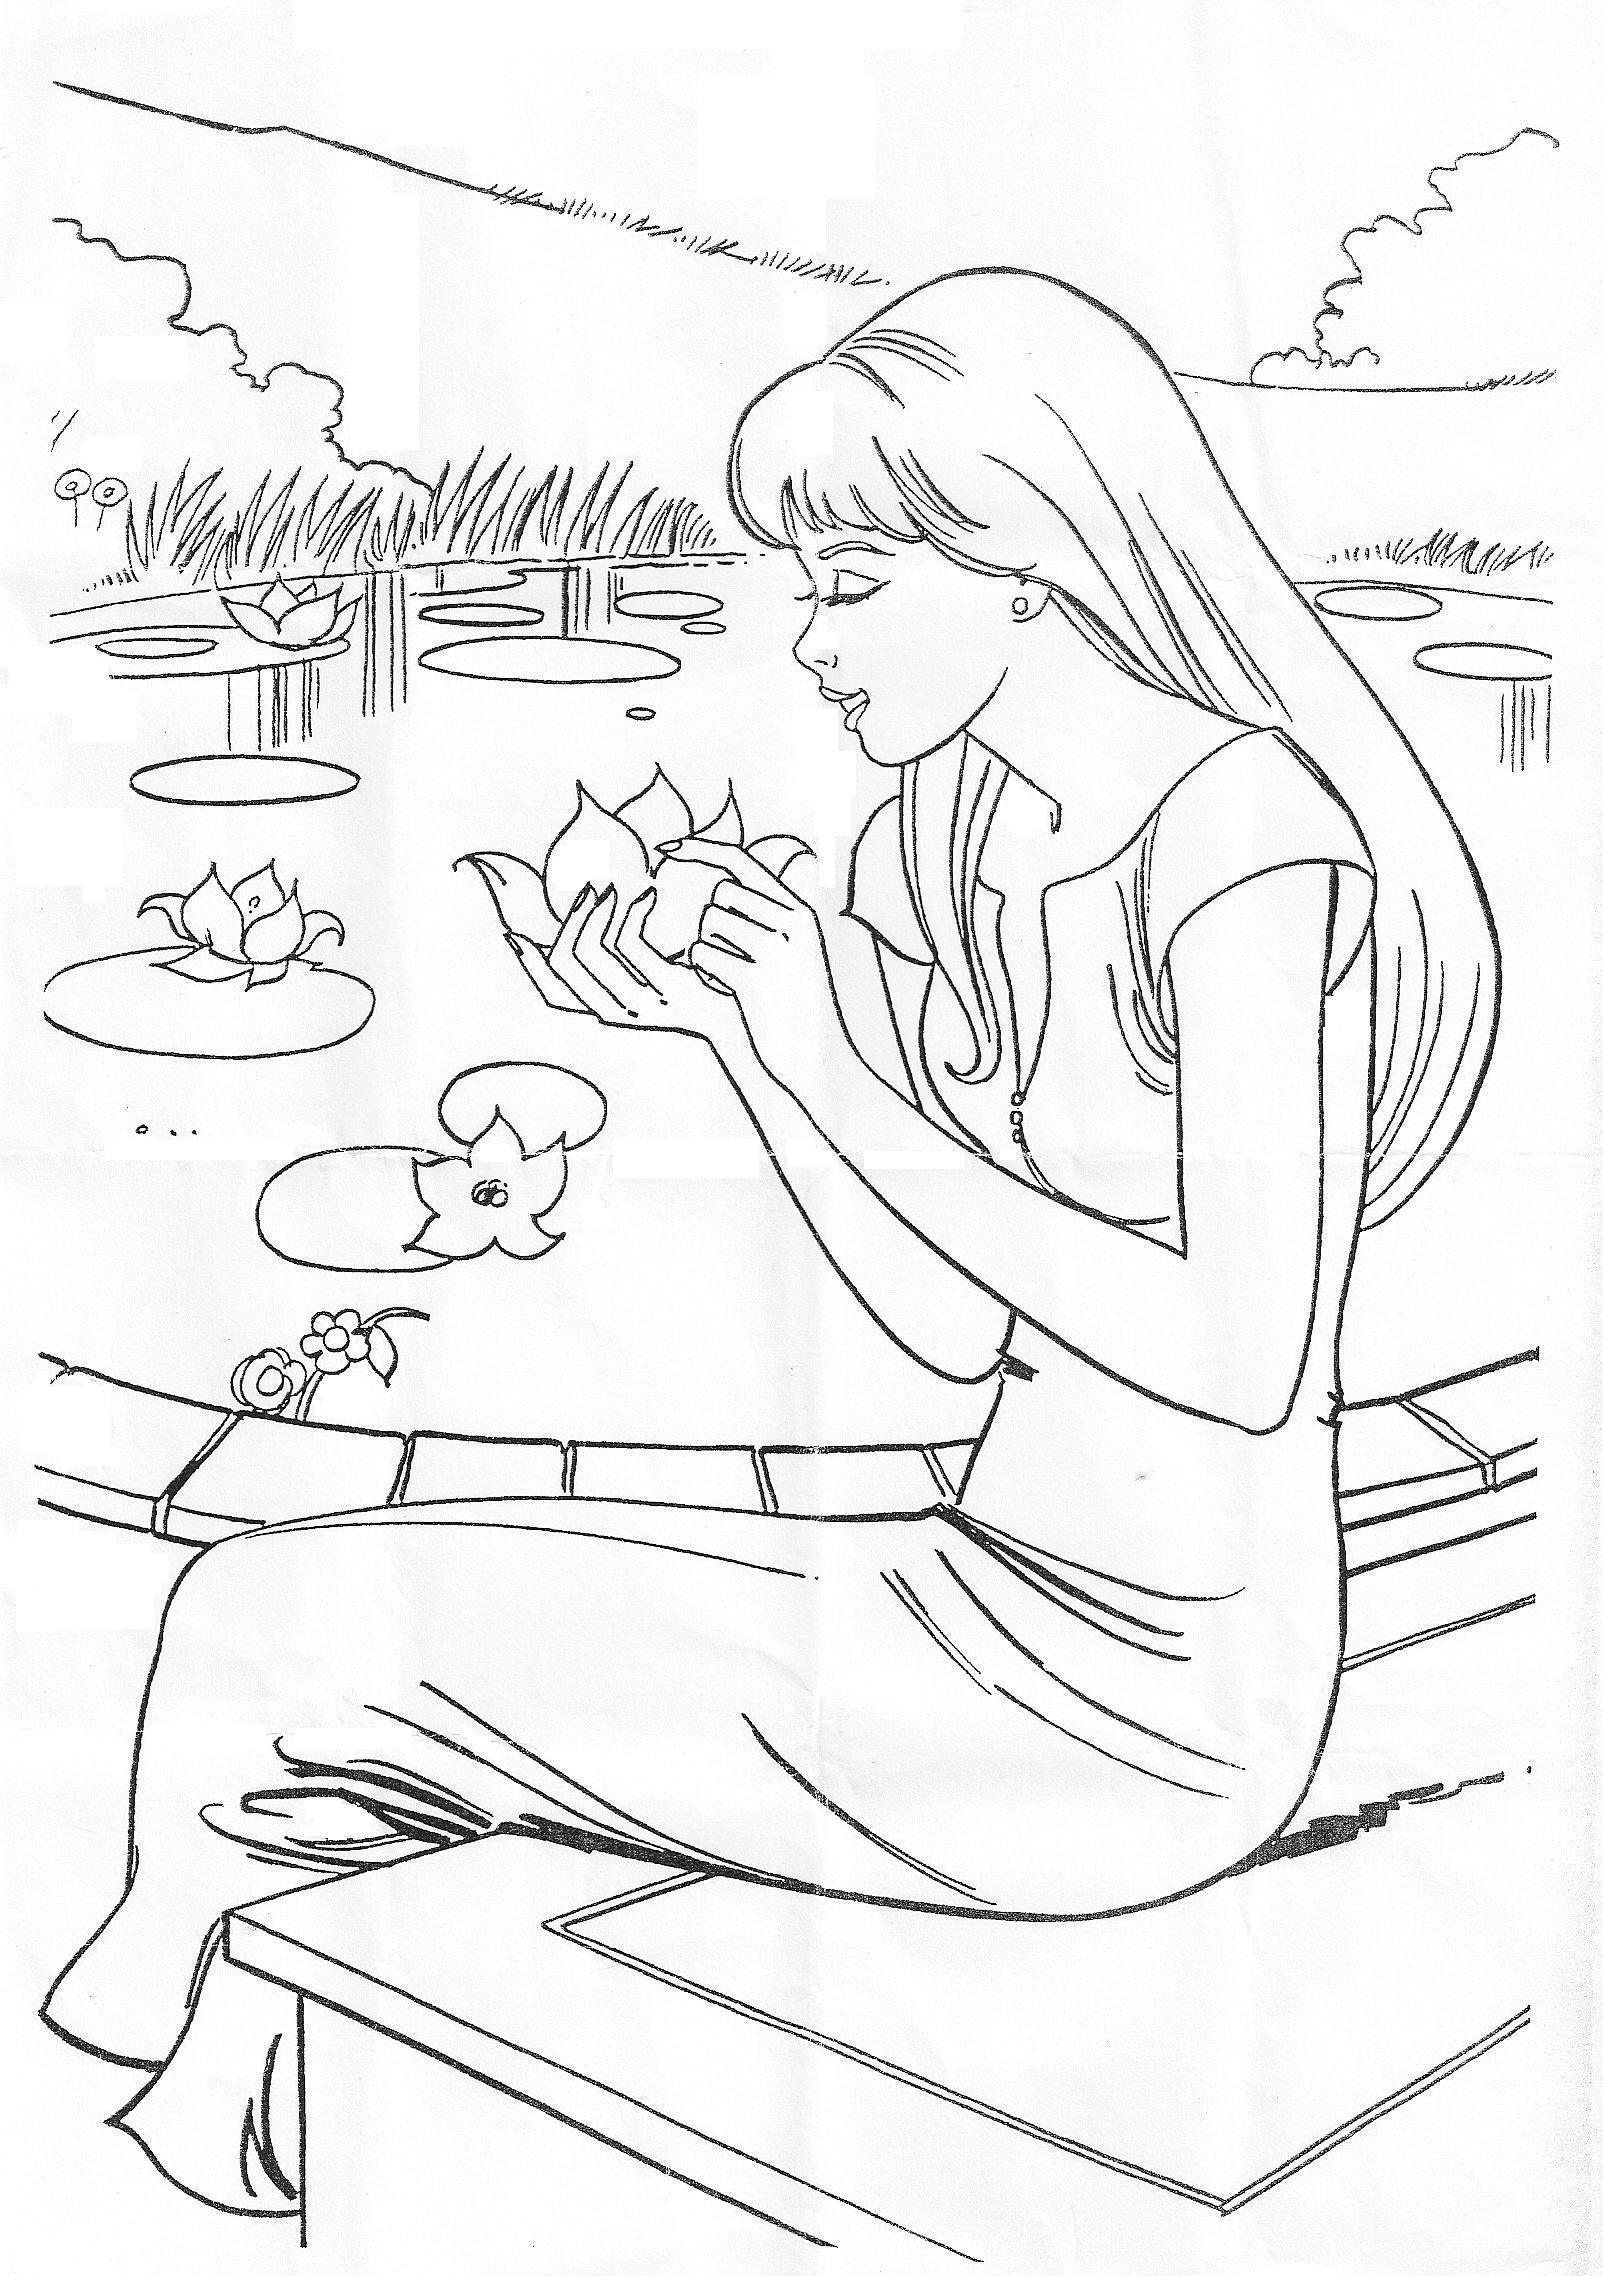 Barbie Dreamhouse Coloring Pages - Coloring Home